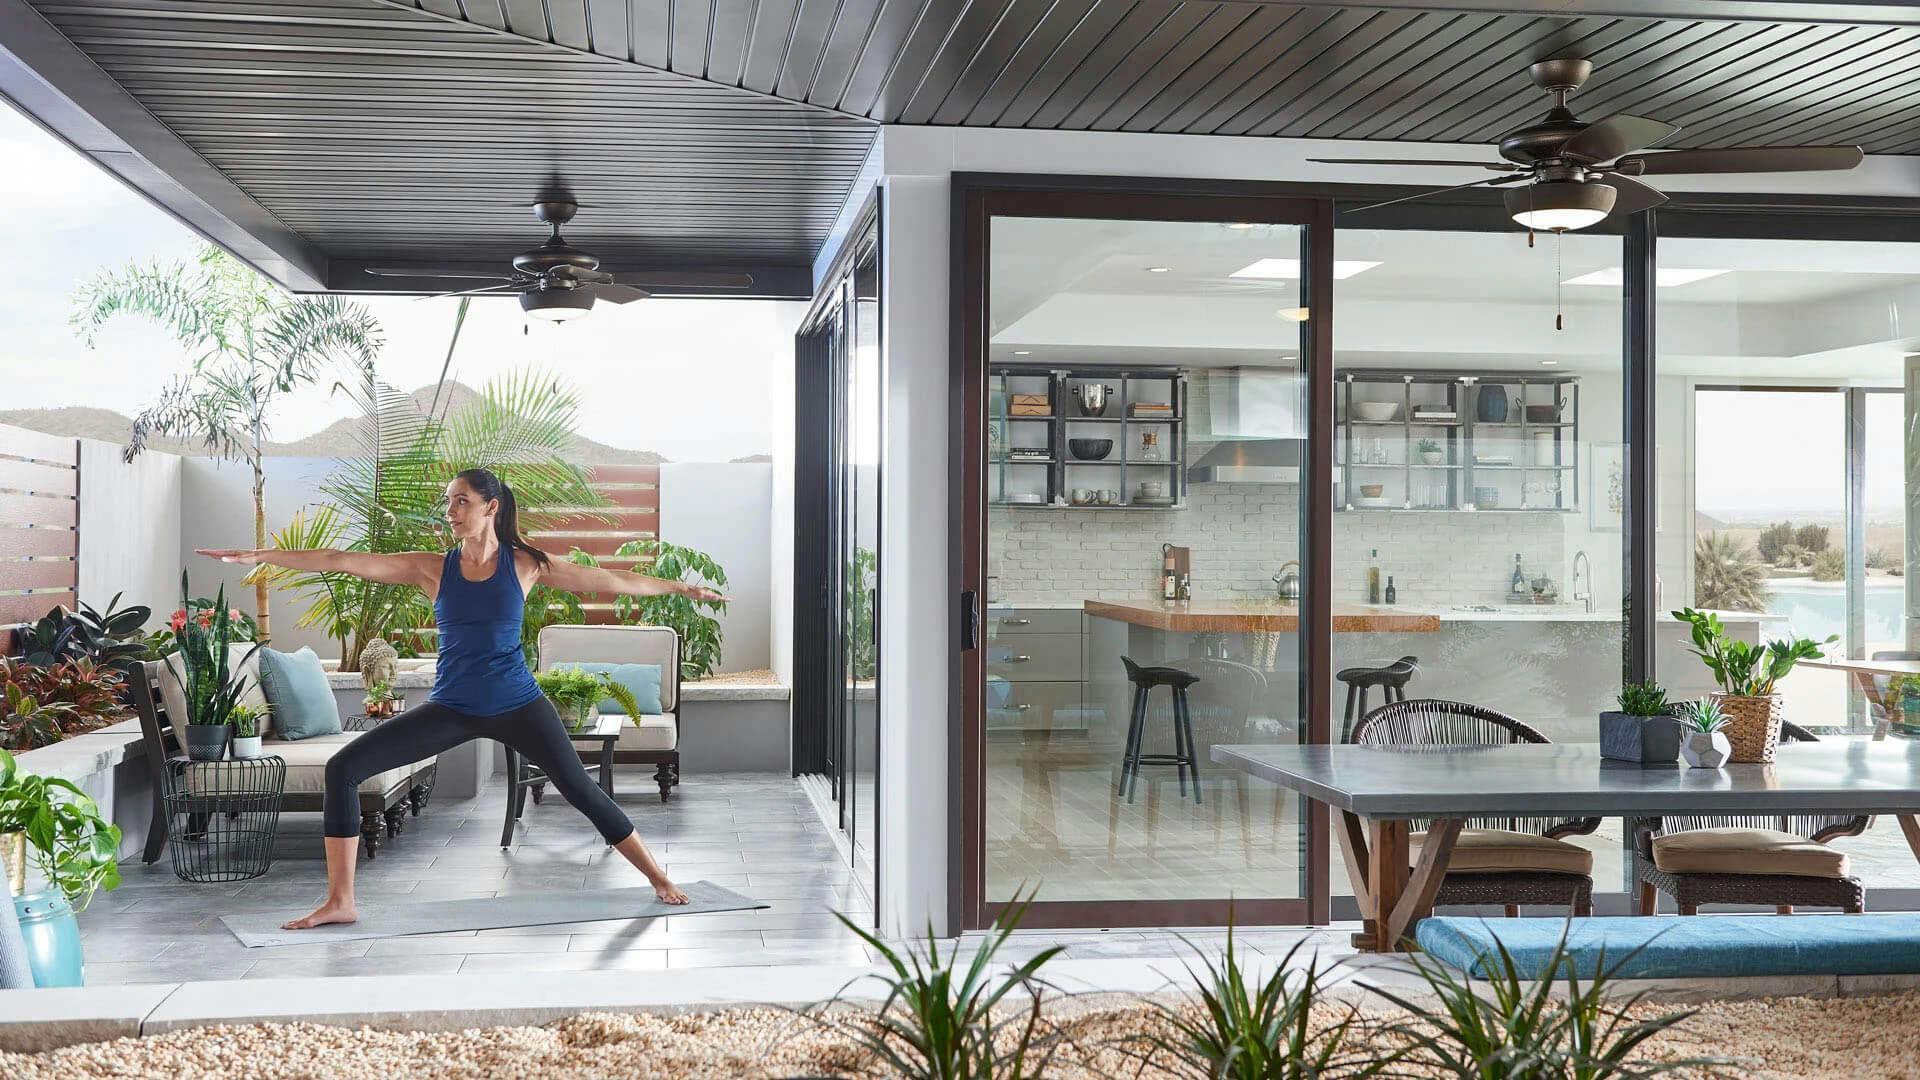 Outdoor patio with a woman doing yoga under a Kevlar ceiling fan with an attached light kit